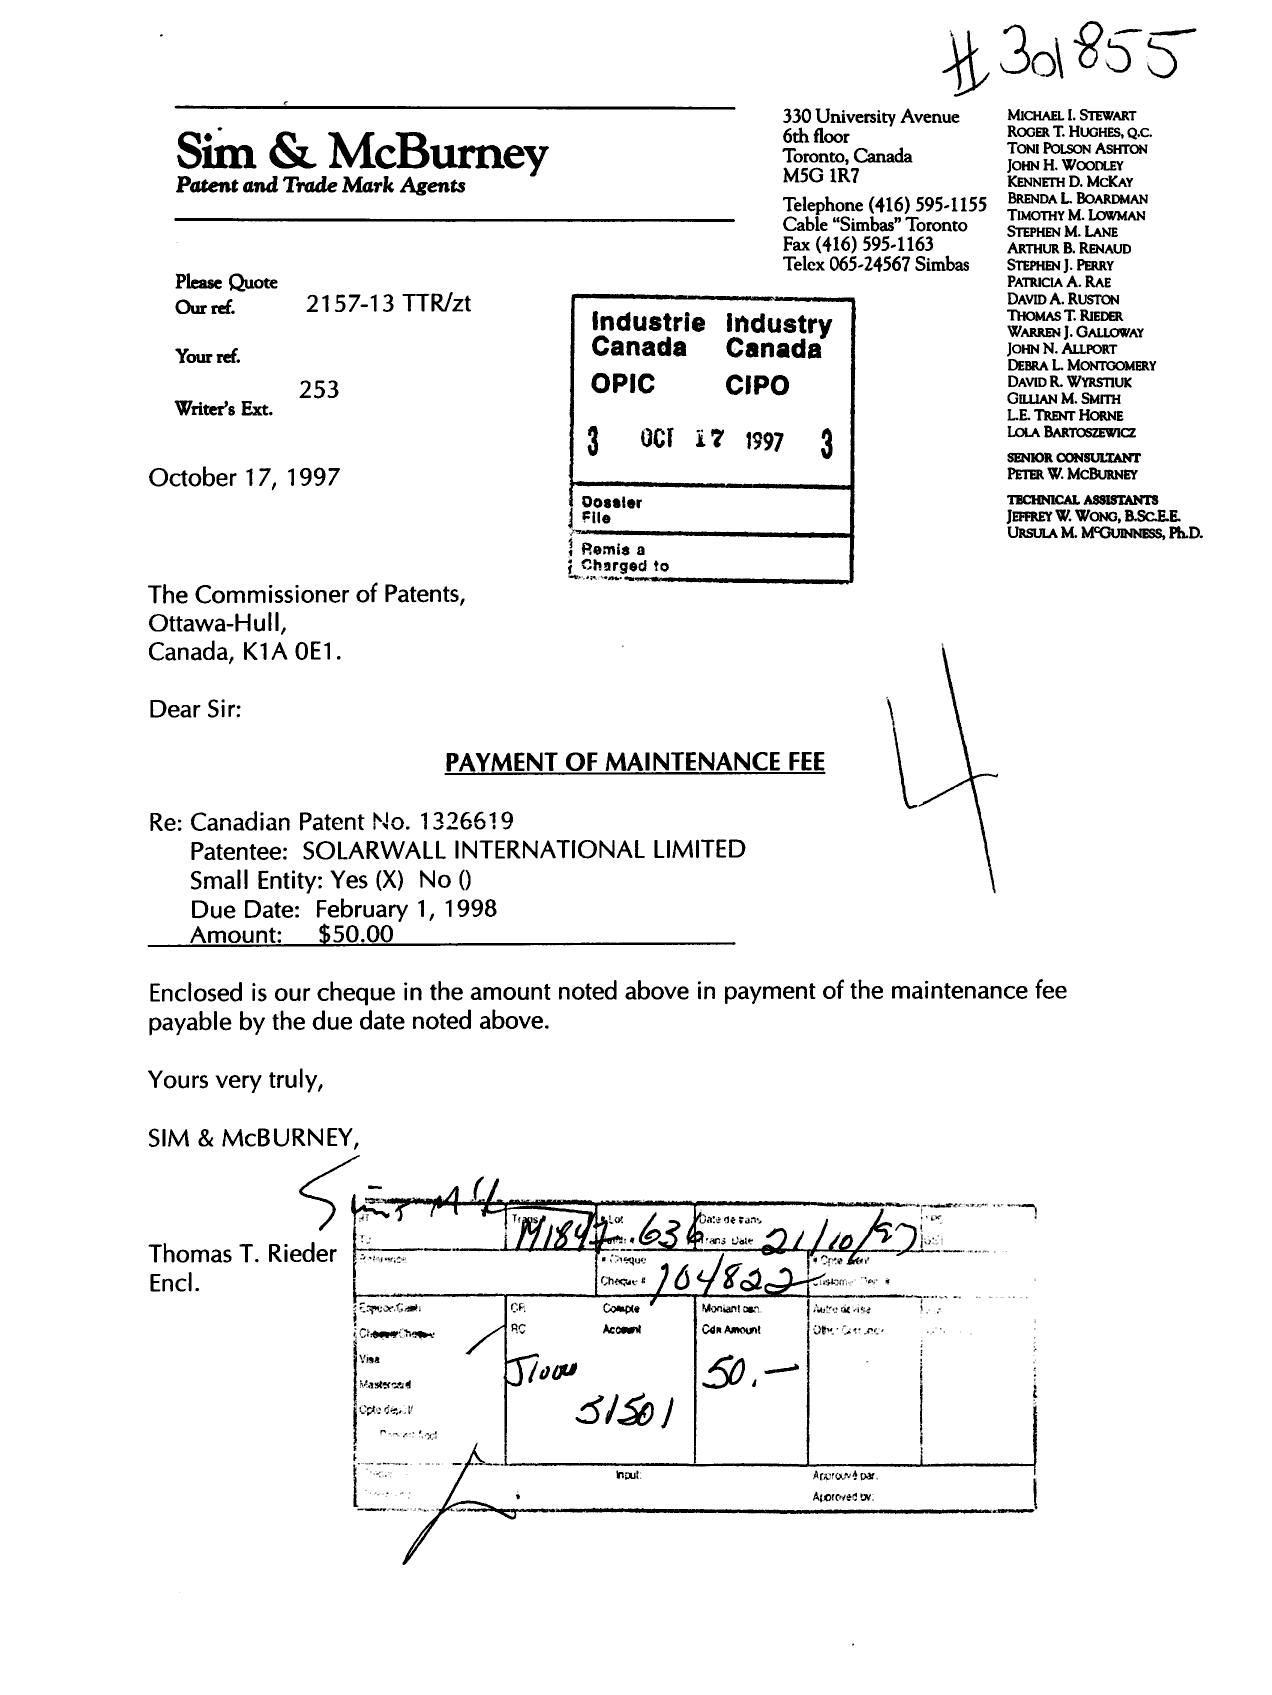 Canadian Patent Document 1326619. Fees 19971017. Image 1 of 1